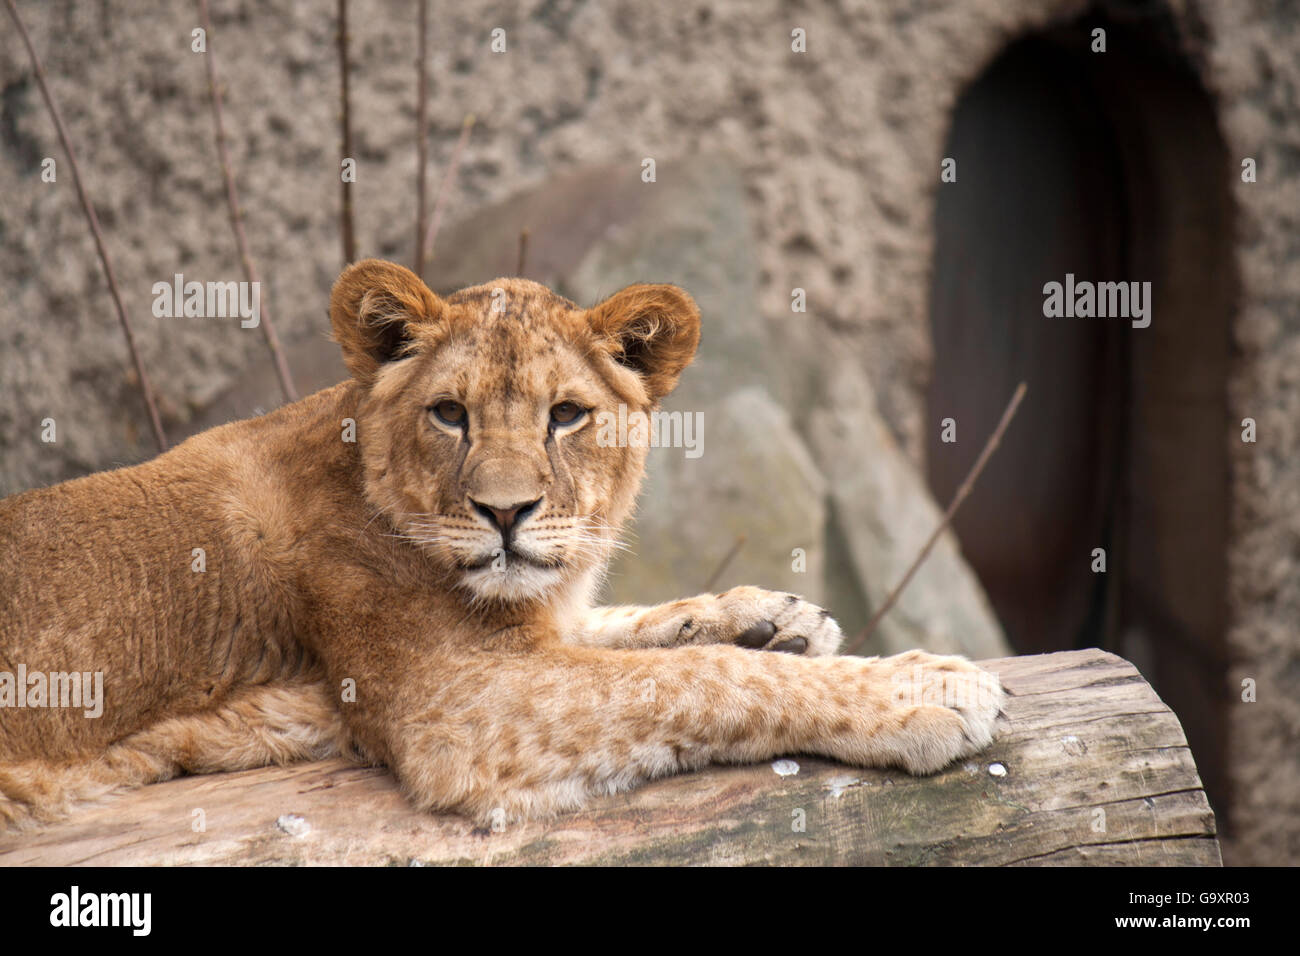 Lion in the zoo Stock Photo